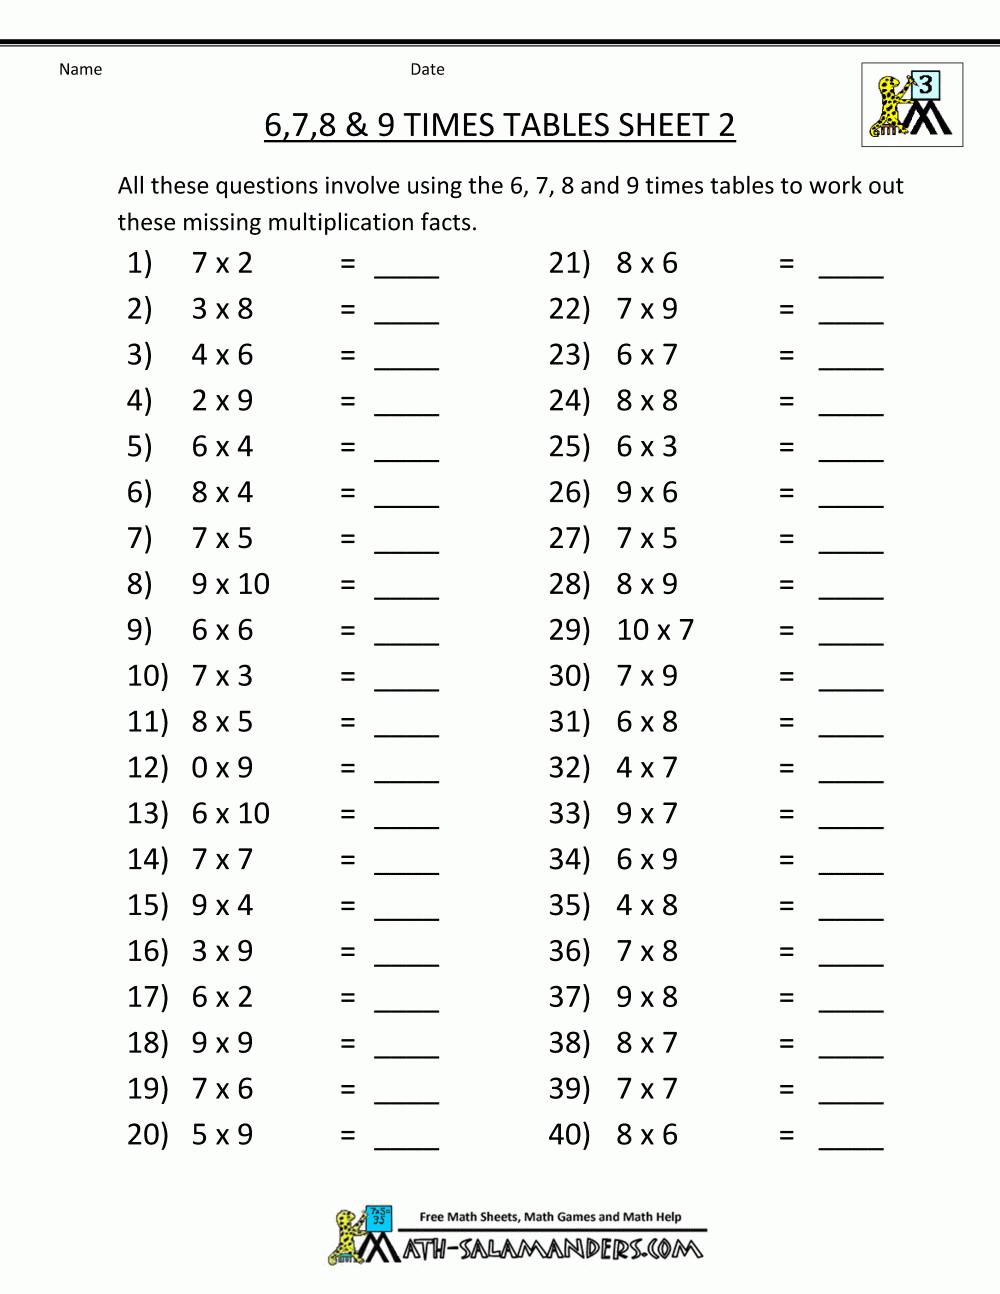 Free Math Sheets Multiplication 6 7 8 9 Times Tables 2 throughout Multiplication Worksheets Hundreds